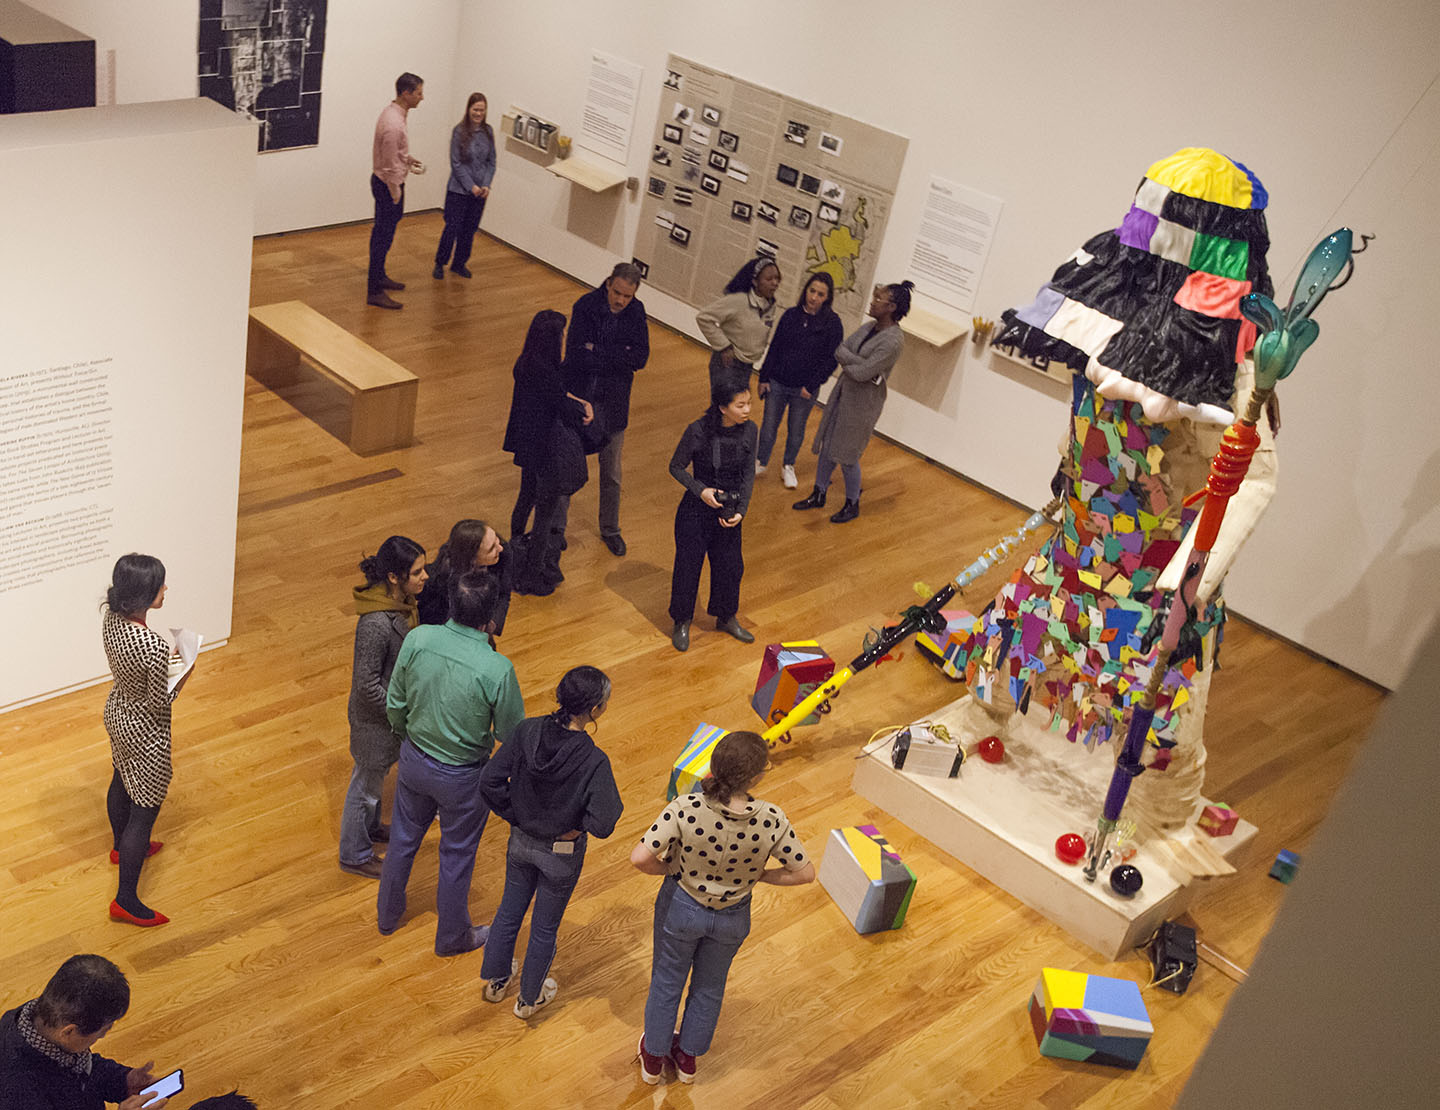 people looking at large figurative sculpture, gallery photographed from above